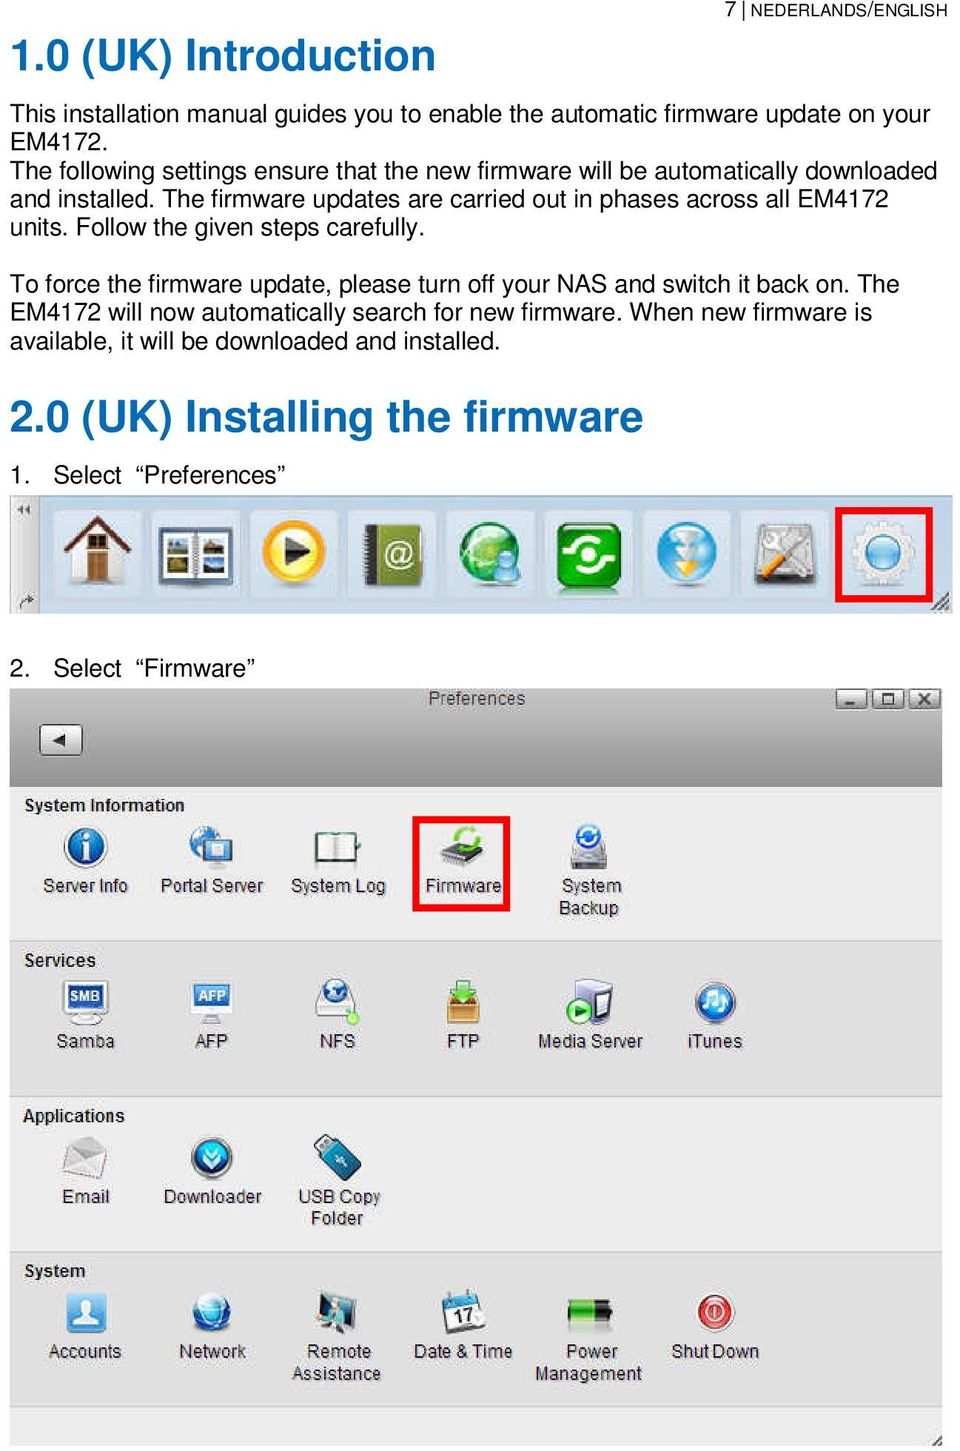 The firmware updates are carried out in phases across all EM4172 units. Follow the given steps carefully.